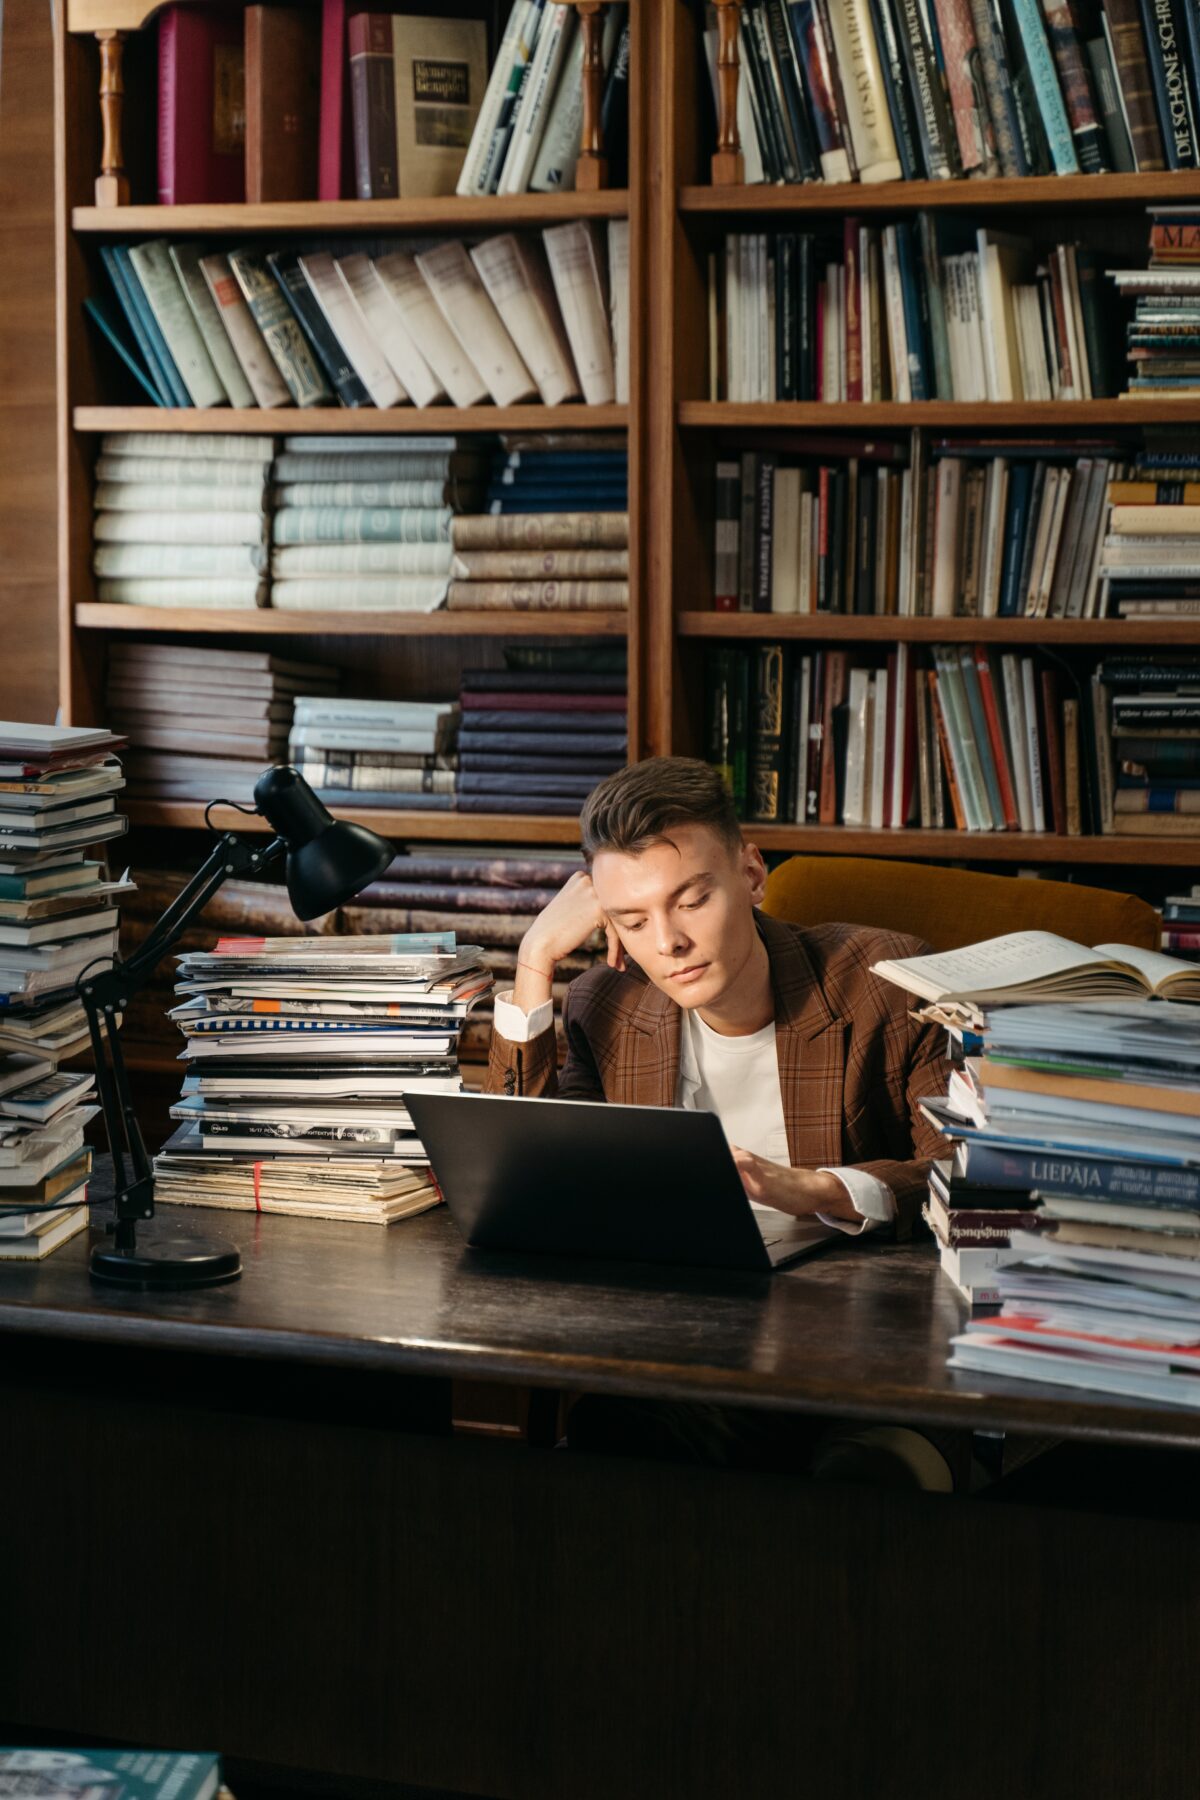 Man at a desk looking at his computer, and surrounded by books.